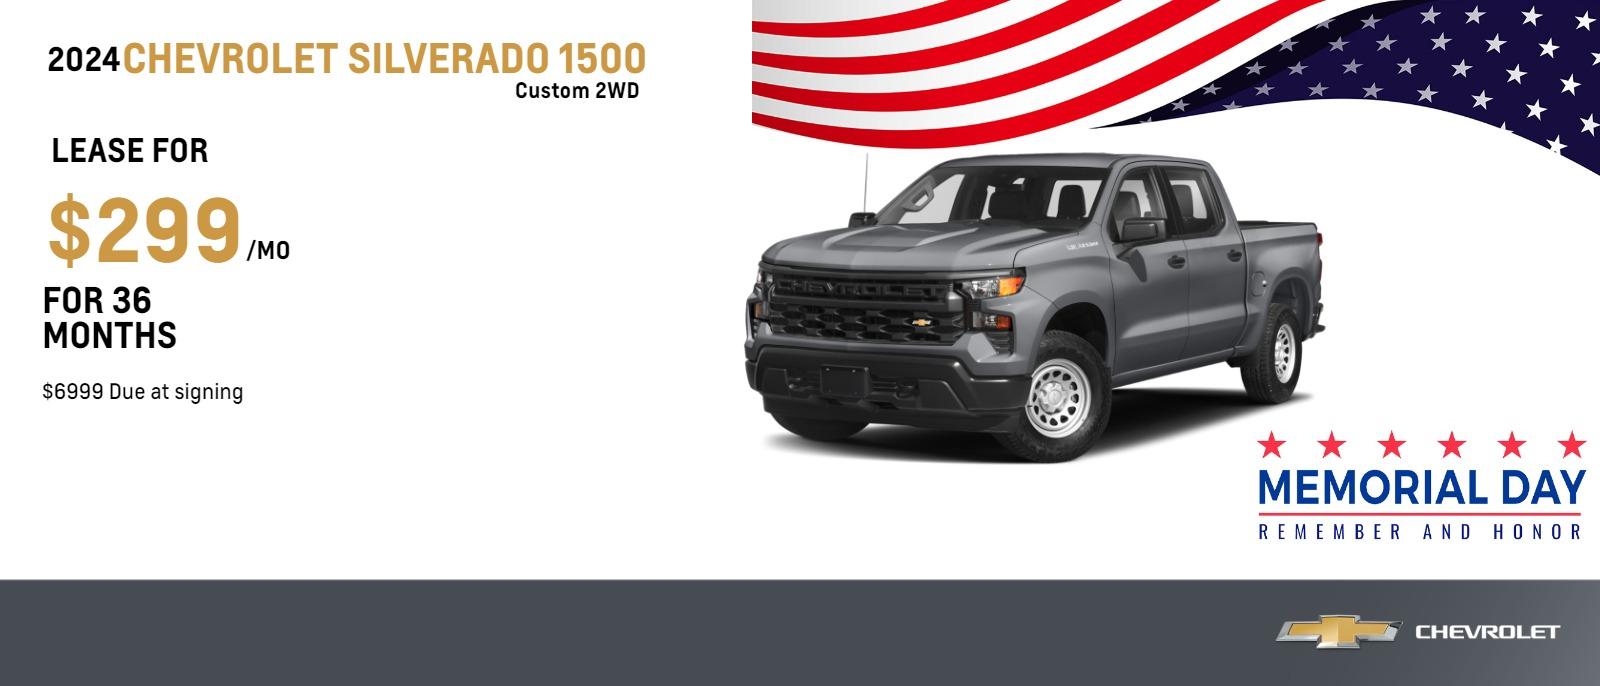 2024 Chevrolet Silverado 1500 Crew Custom 2WD

 	
$299 Month Lease | 36 Months | $6999 Due at signing